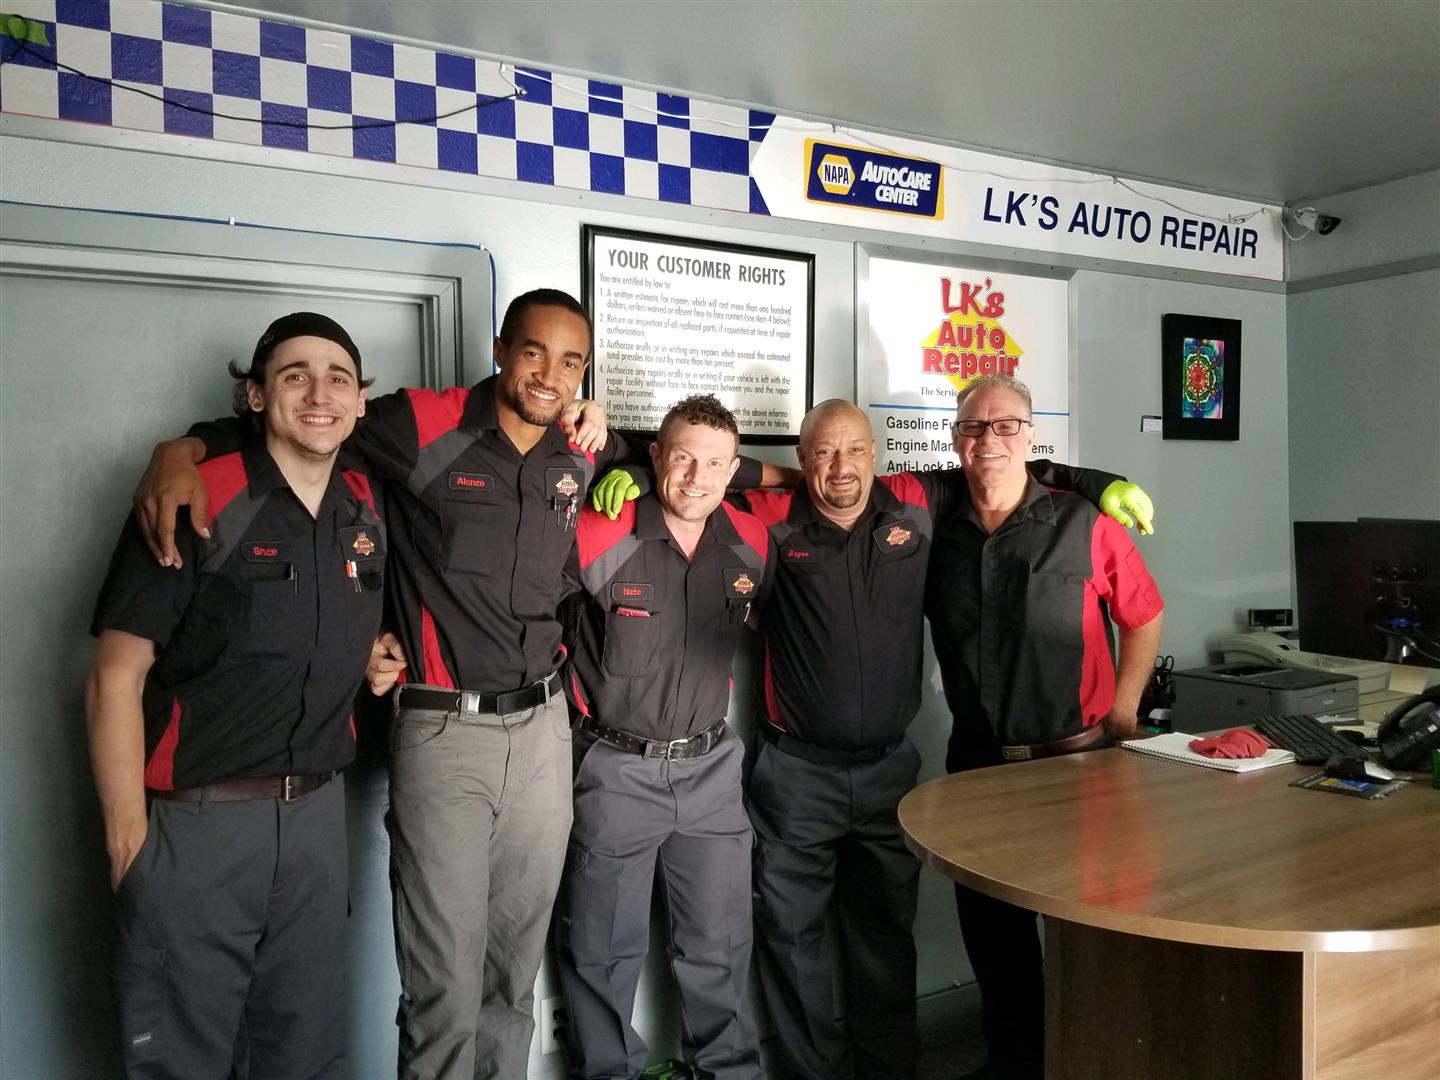 What Kind Of Customer Service Can You Expect From LK’s Auto Repair?